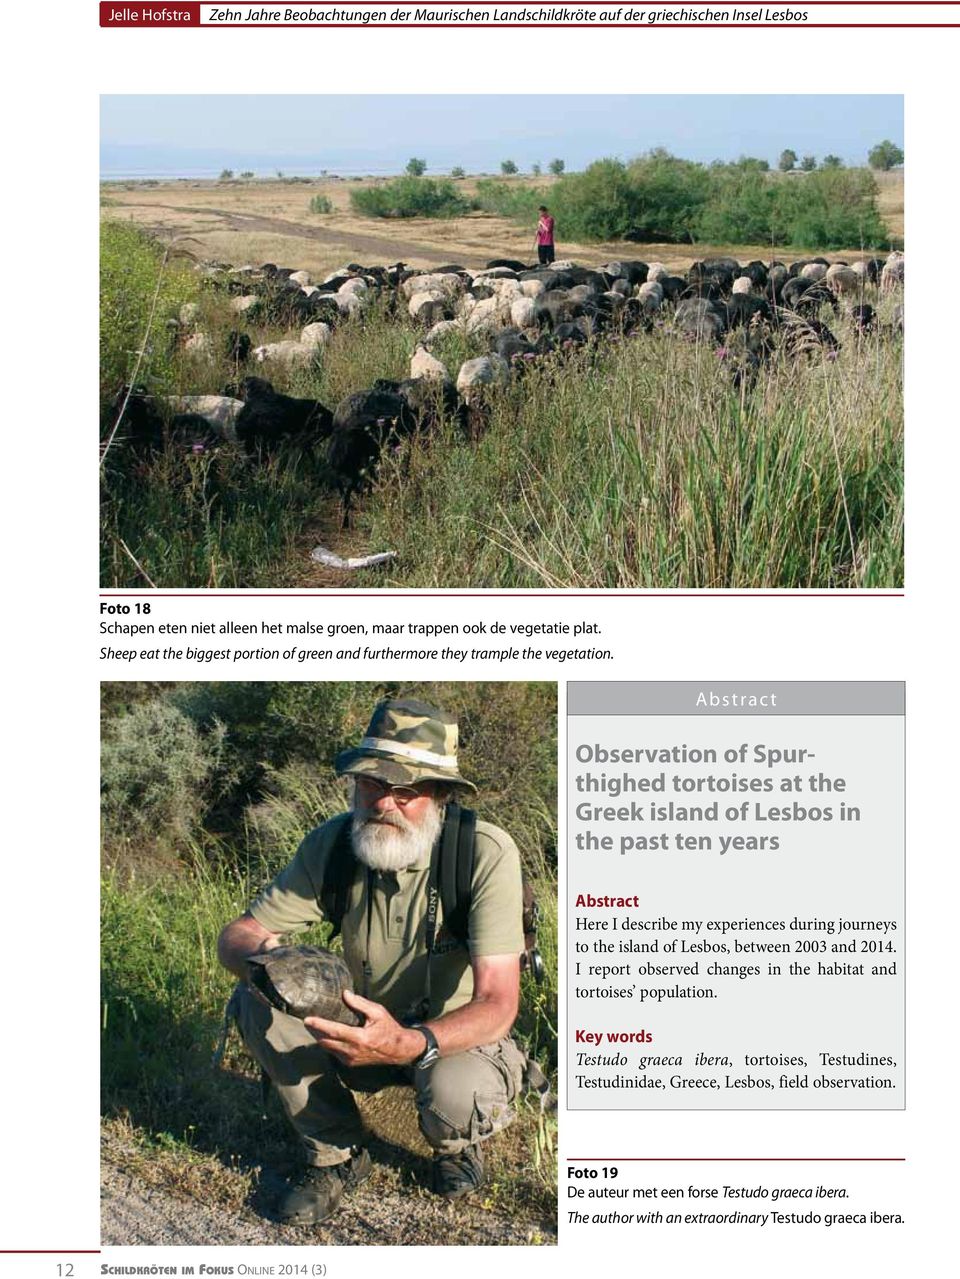 Abstrac t Observation of Spurthighed tortoises at the Greek island of Lesbos in the past ten years Abstract Here I describe my experiences during journeys to the island of Lesbos, between 2003 and